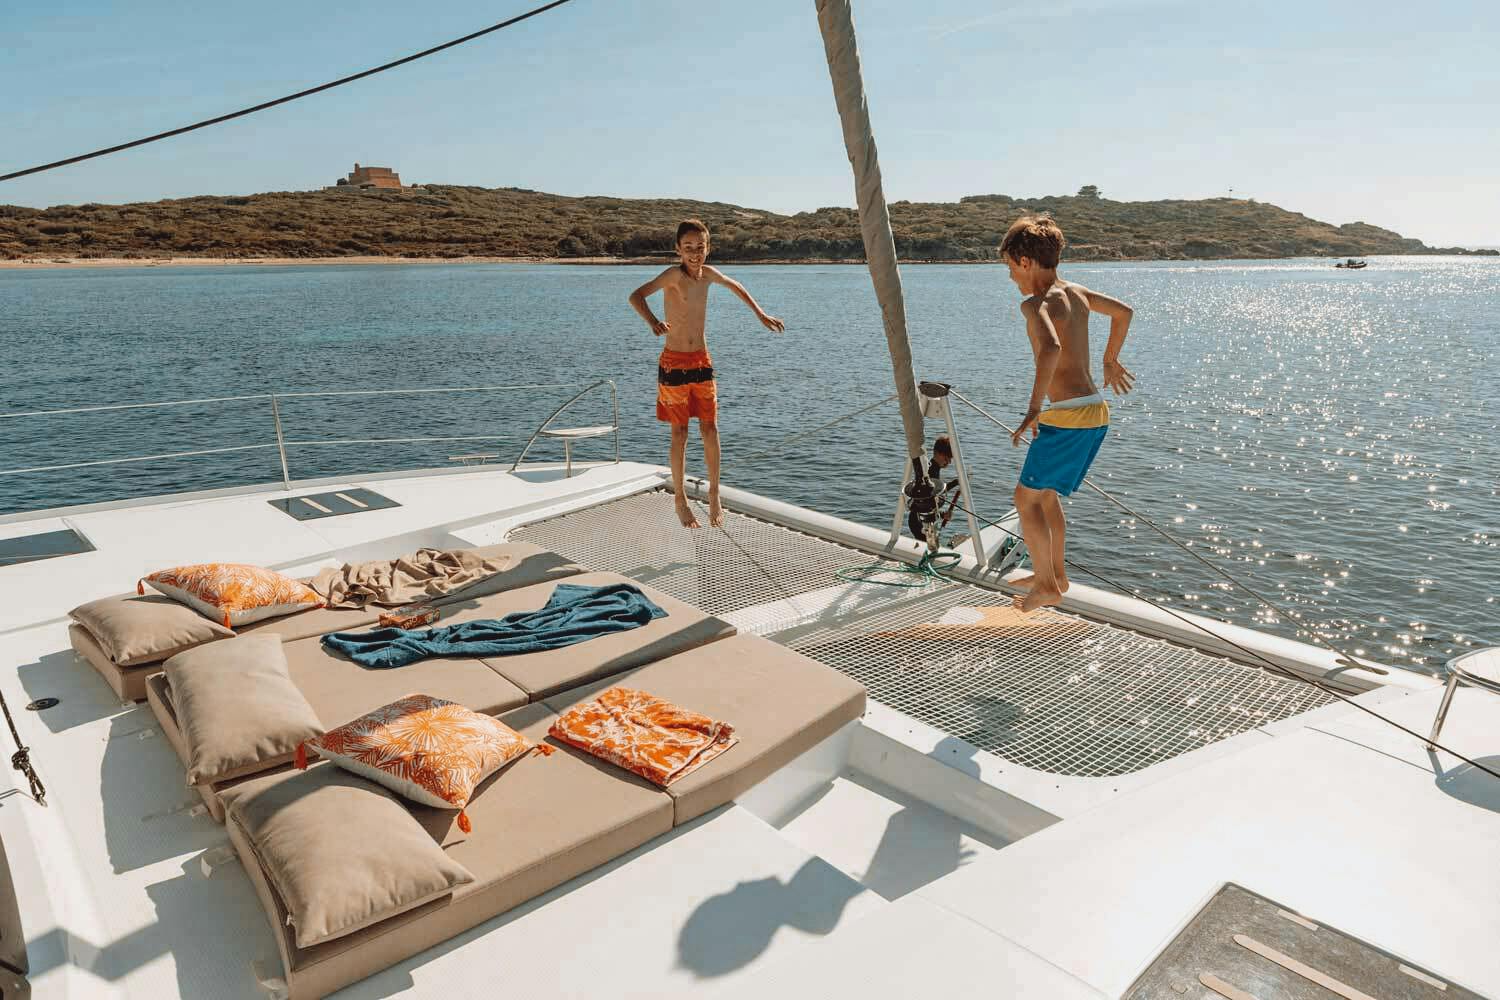 Reconnect on a Yacht Staycation